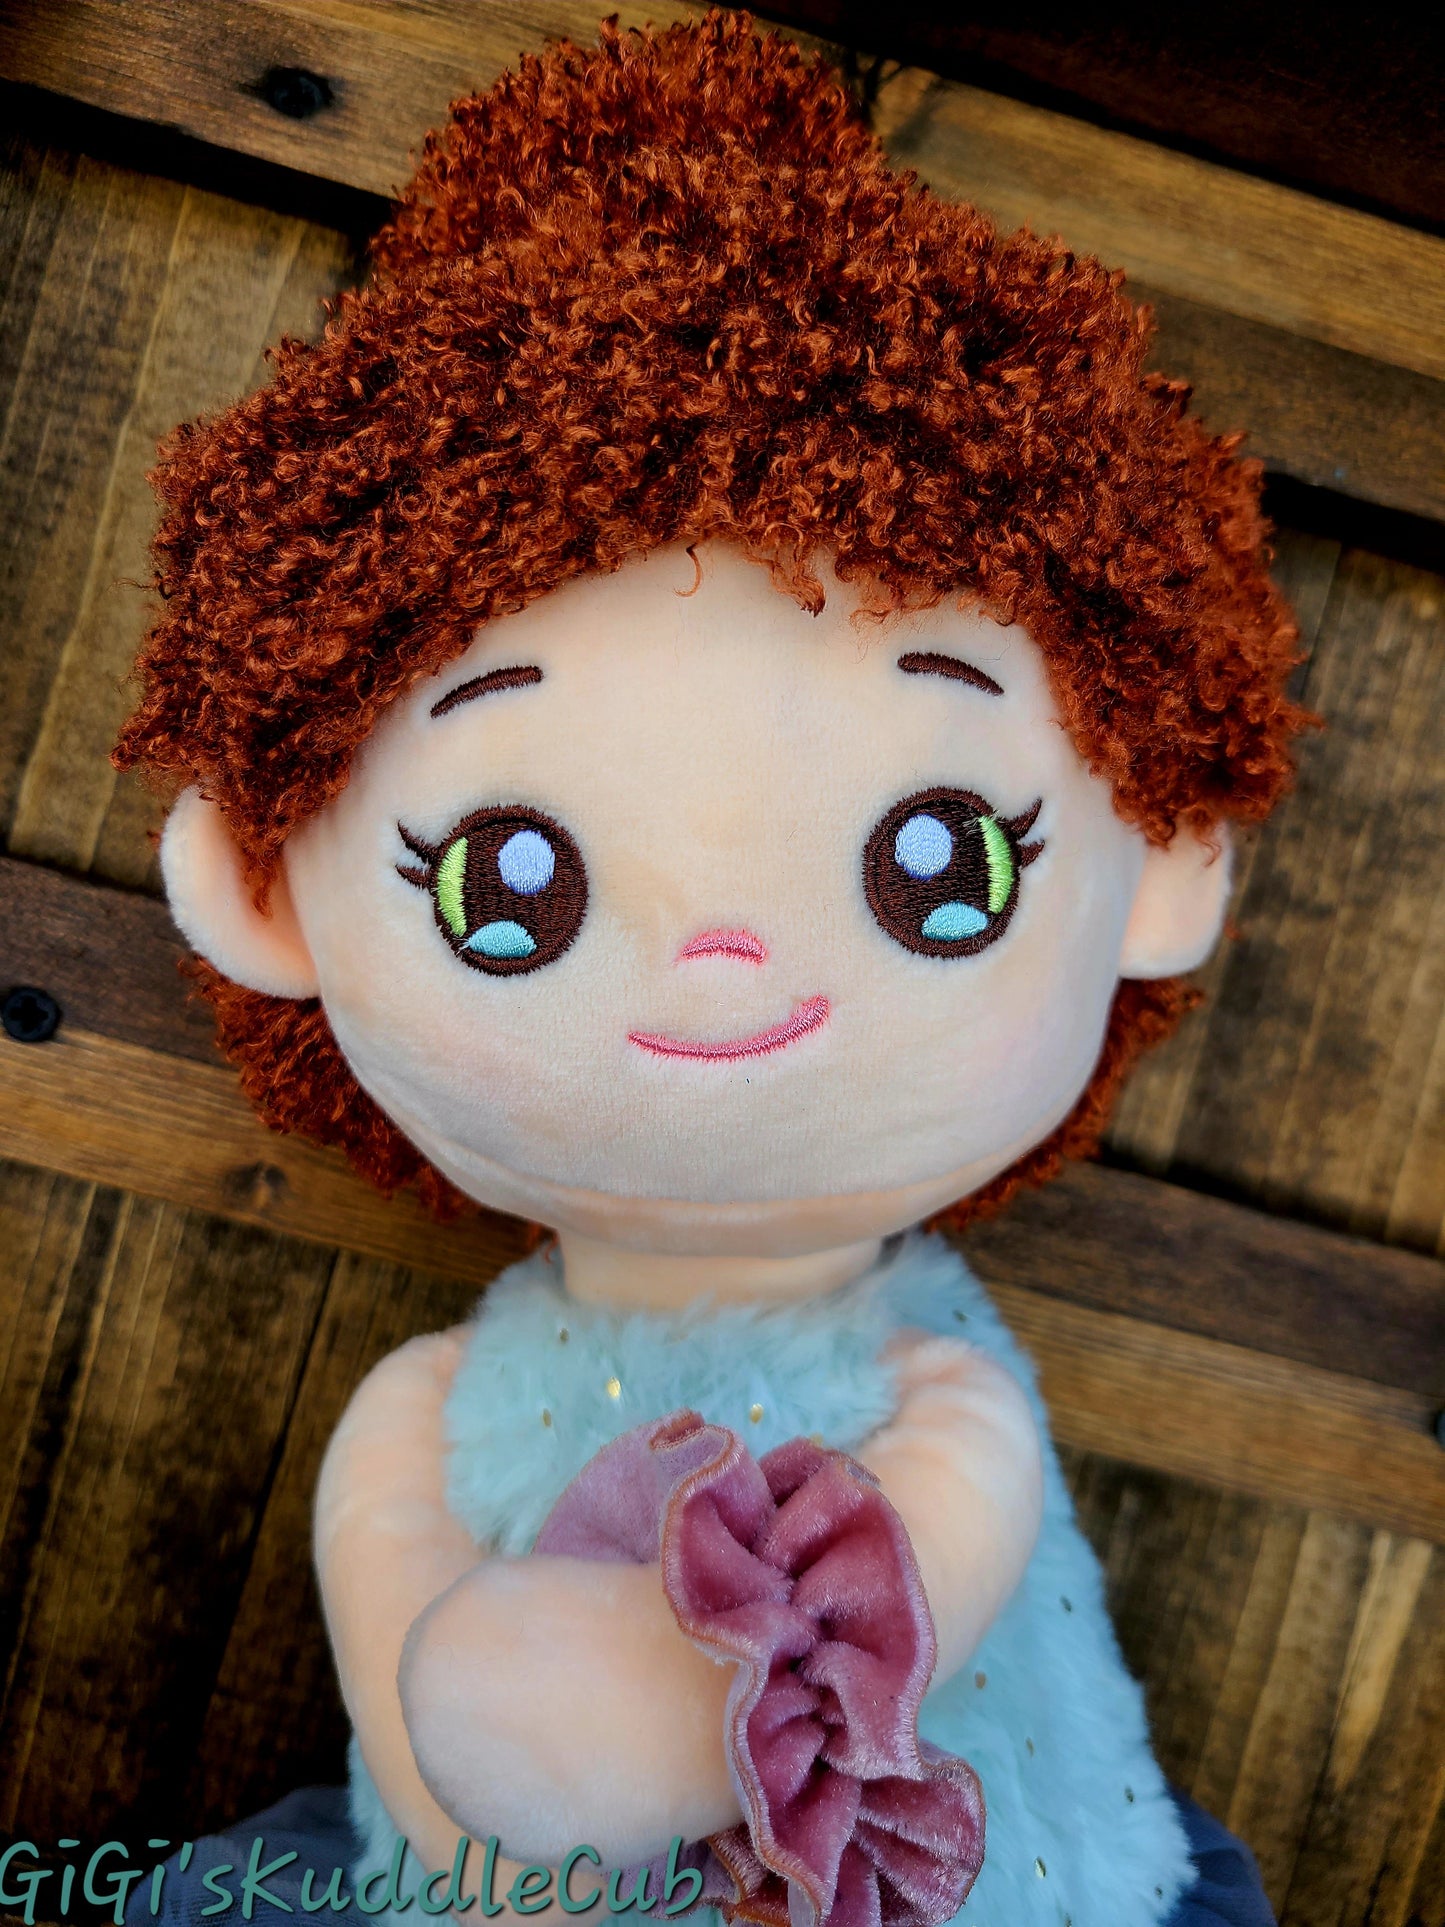 Personalized Soft Plush 15in Curly Red Hair Rag Doll Plush Toy/ Decor/Handmade Baby Gift Toy